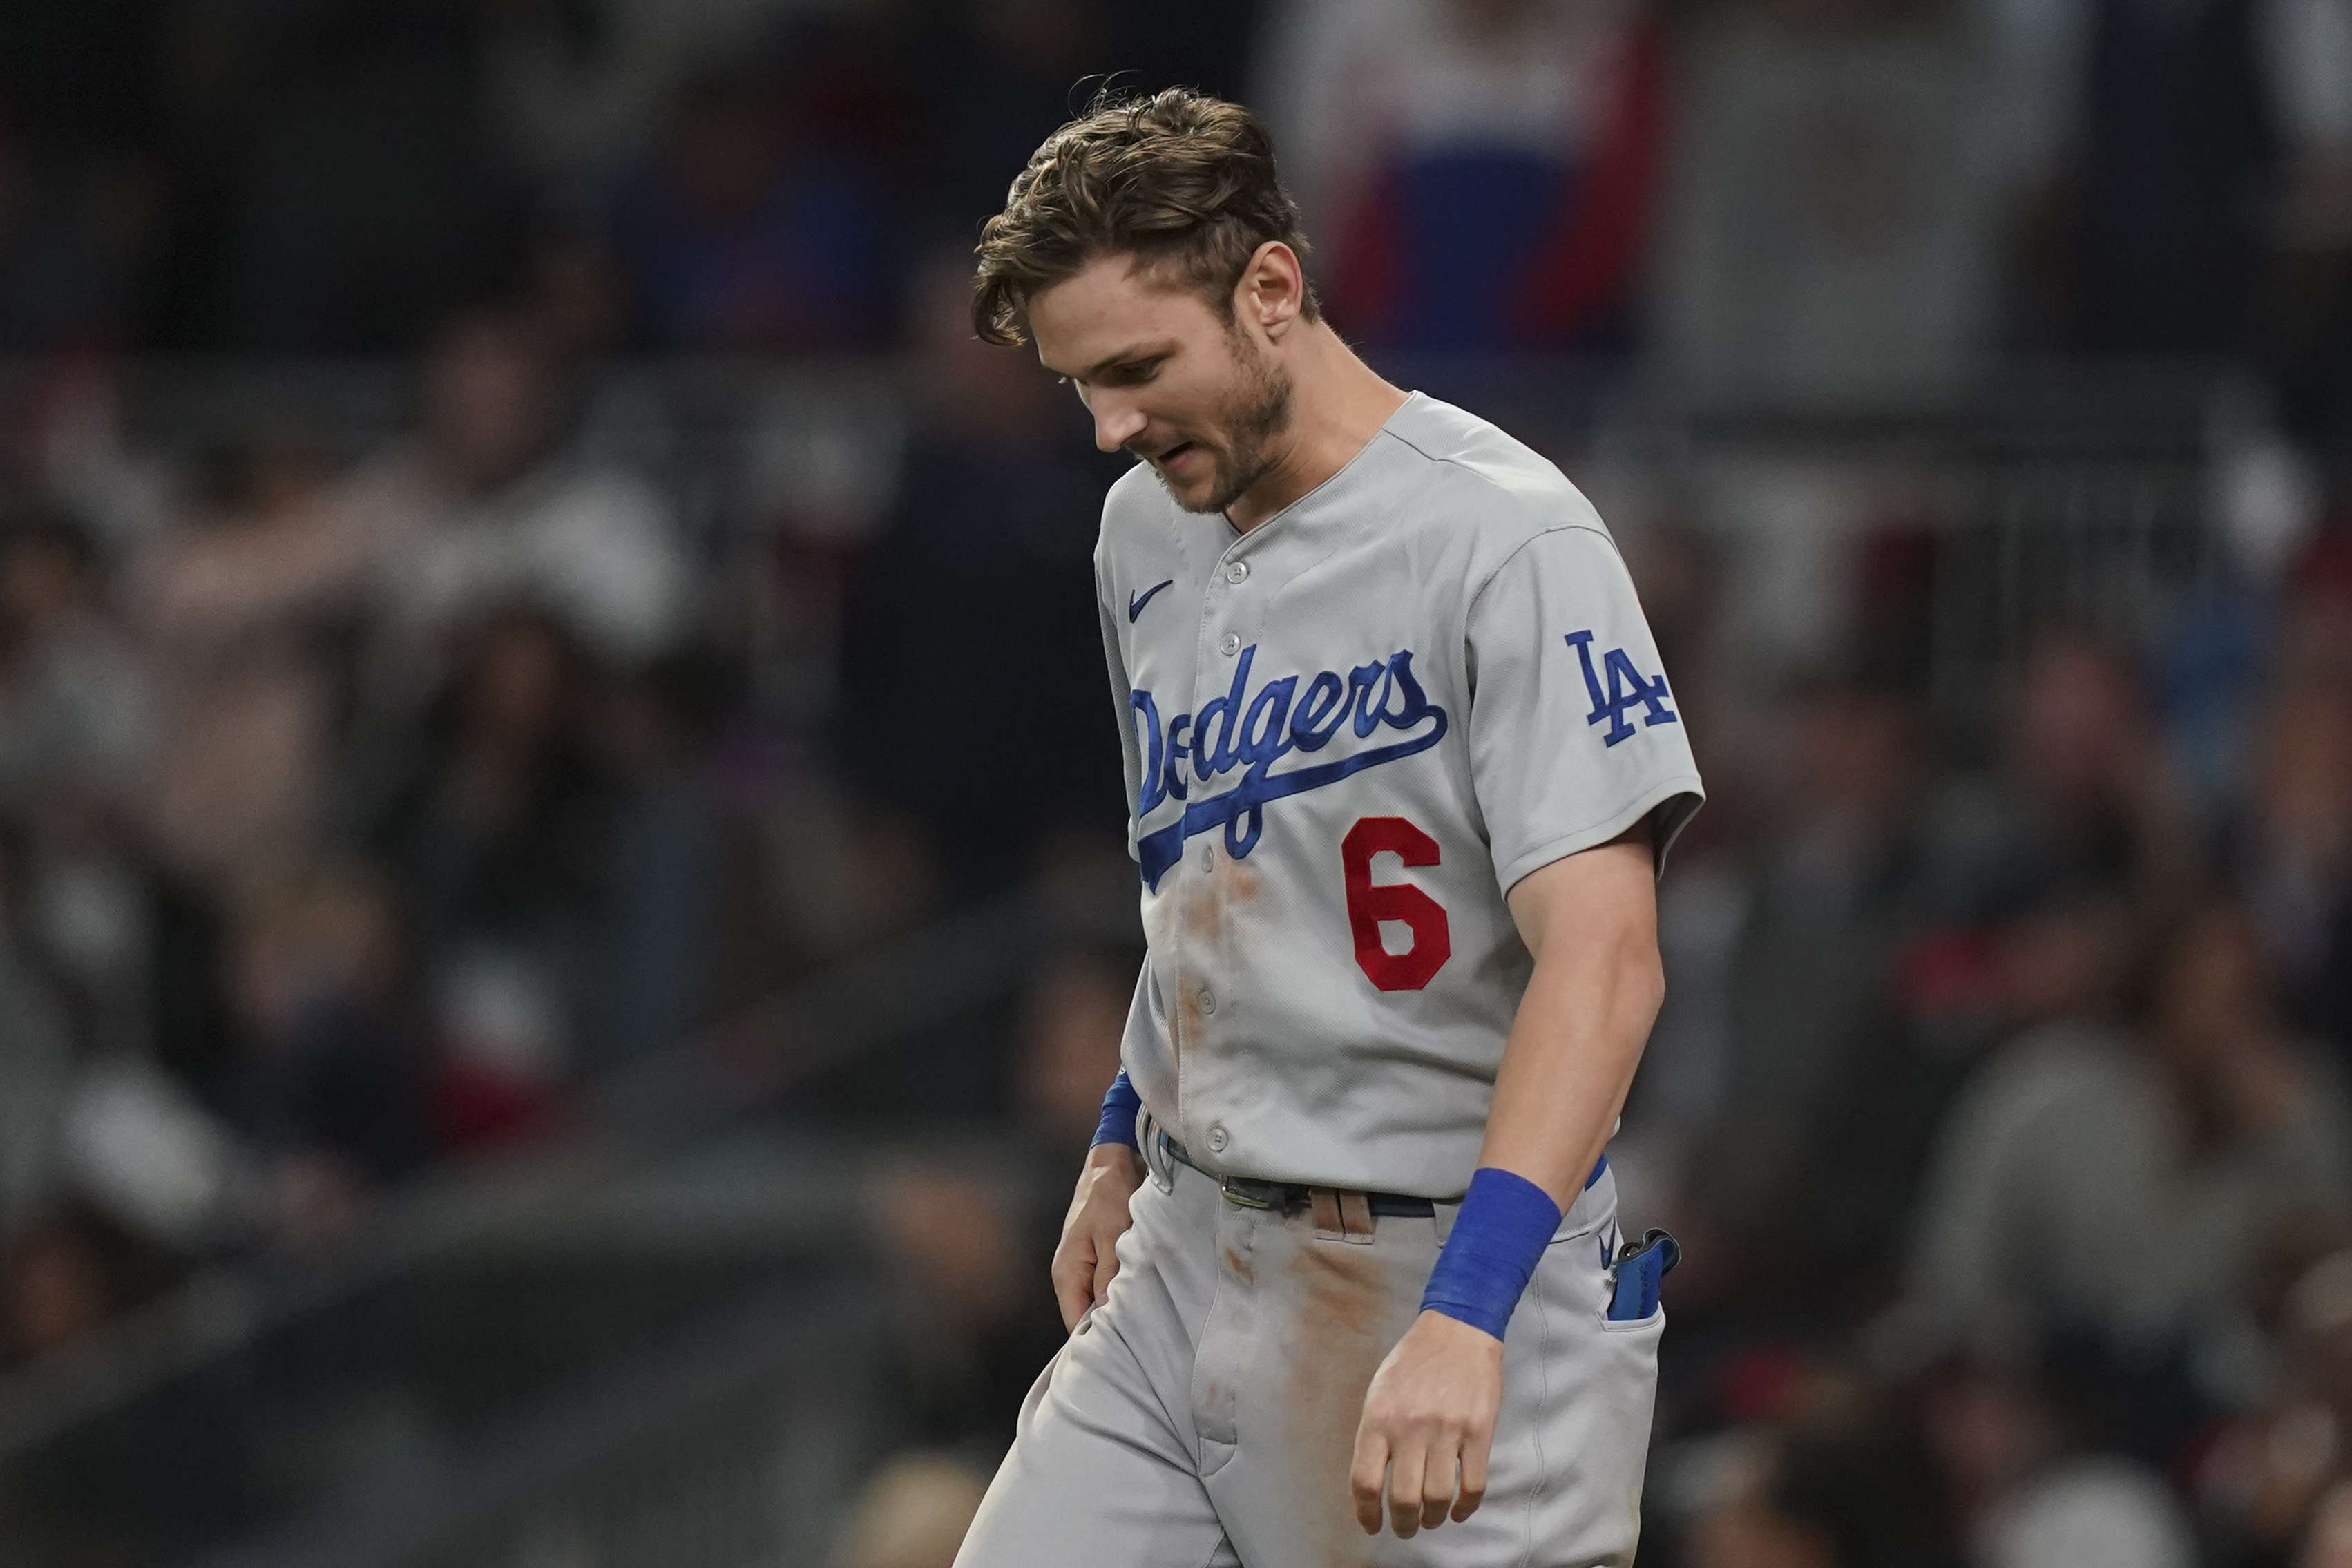 Gonsolin wins 9th, Freeman drives in 5 as Dodgers down Reds